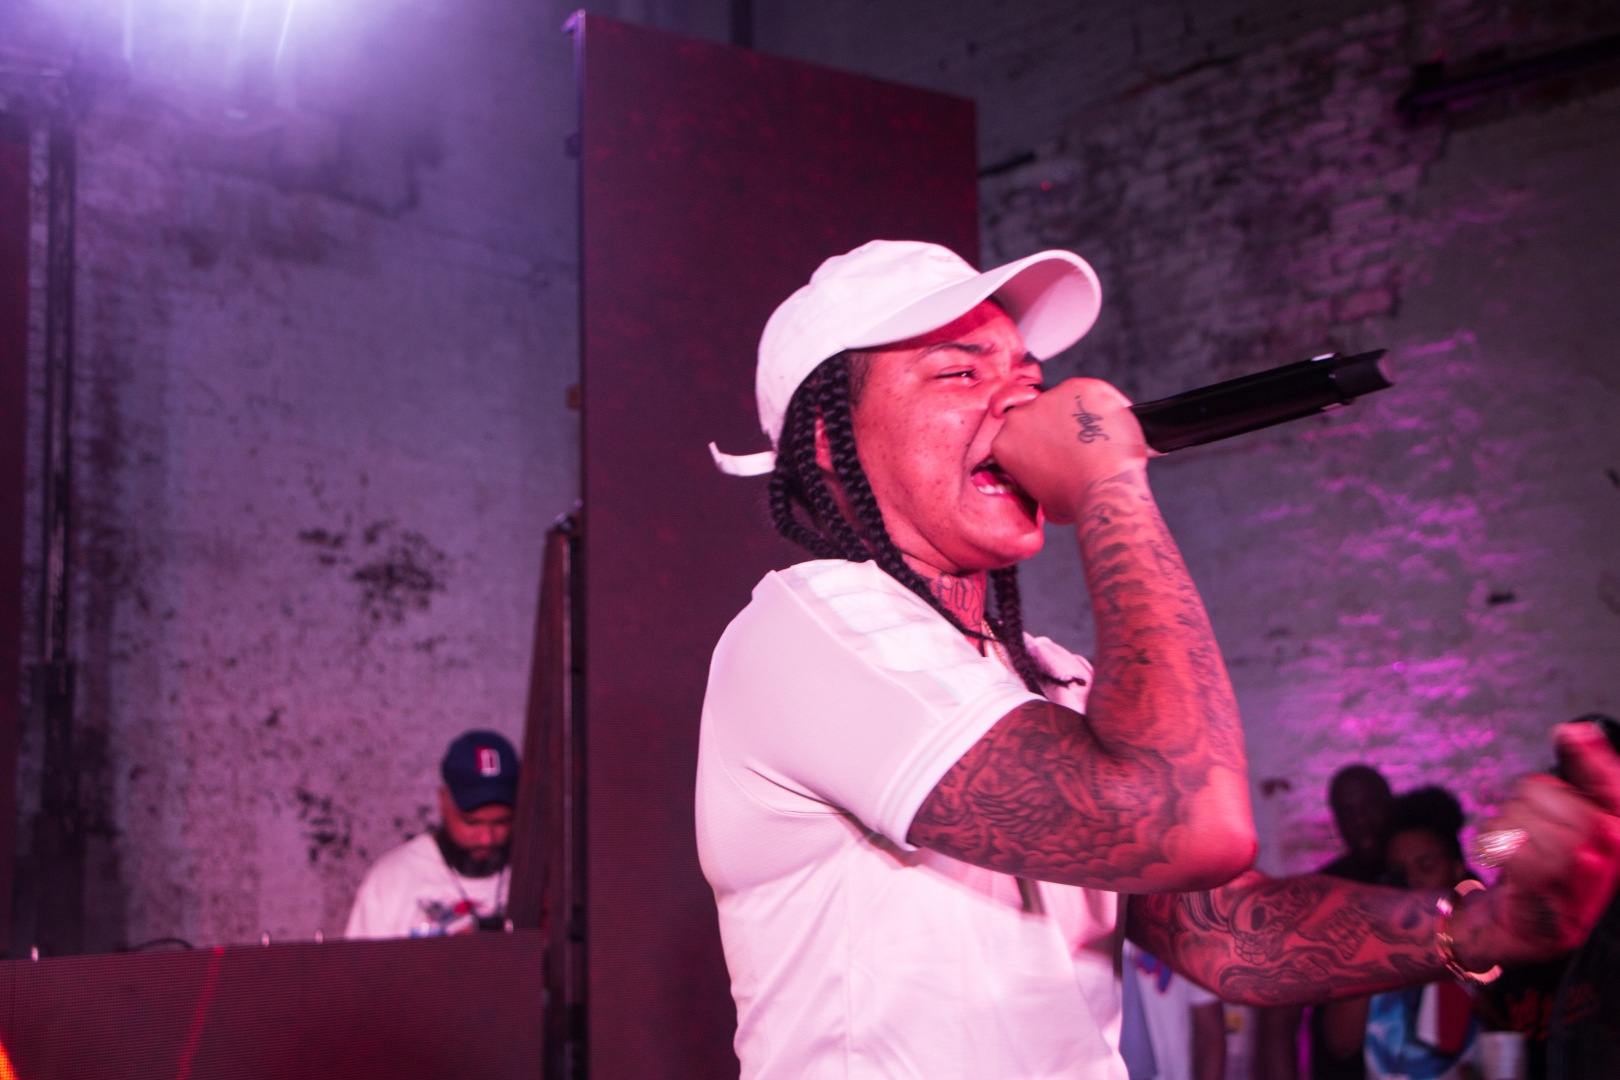 Young M.A performs during DJ Statik Selektah set at Jack Daniel's Tennessee Honey Neighborhood Flavor (Photo courtesy of Flowers Communications Group)